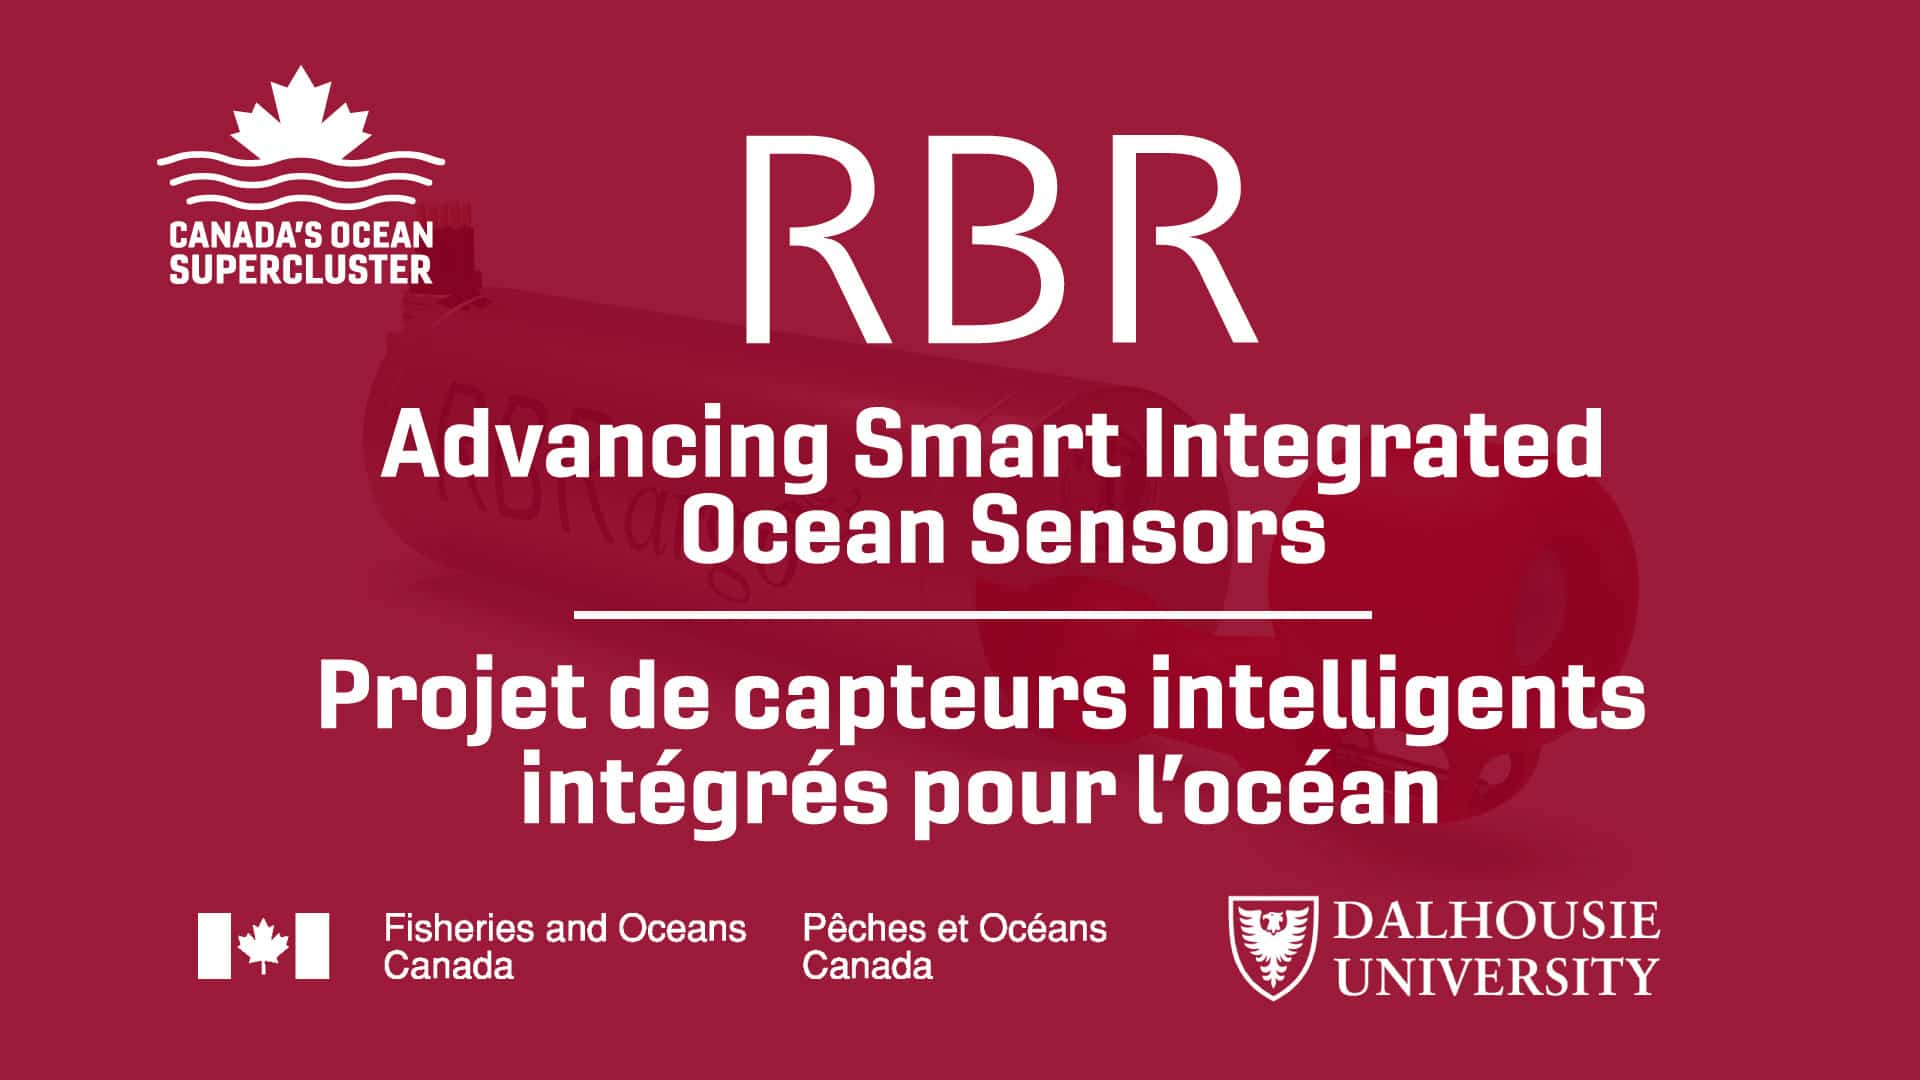 Canada’s Ocean Supercluster awards collaboration between RBR, DFO, and Dalhousie.